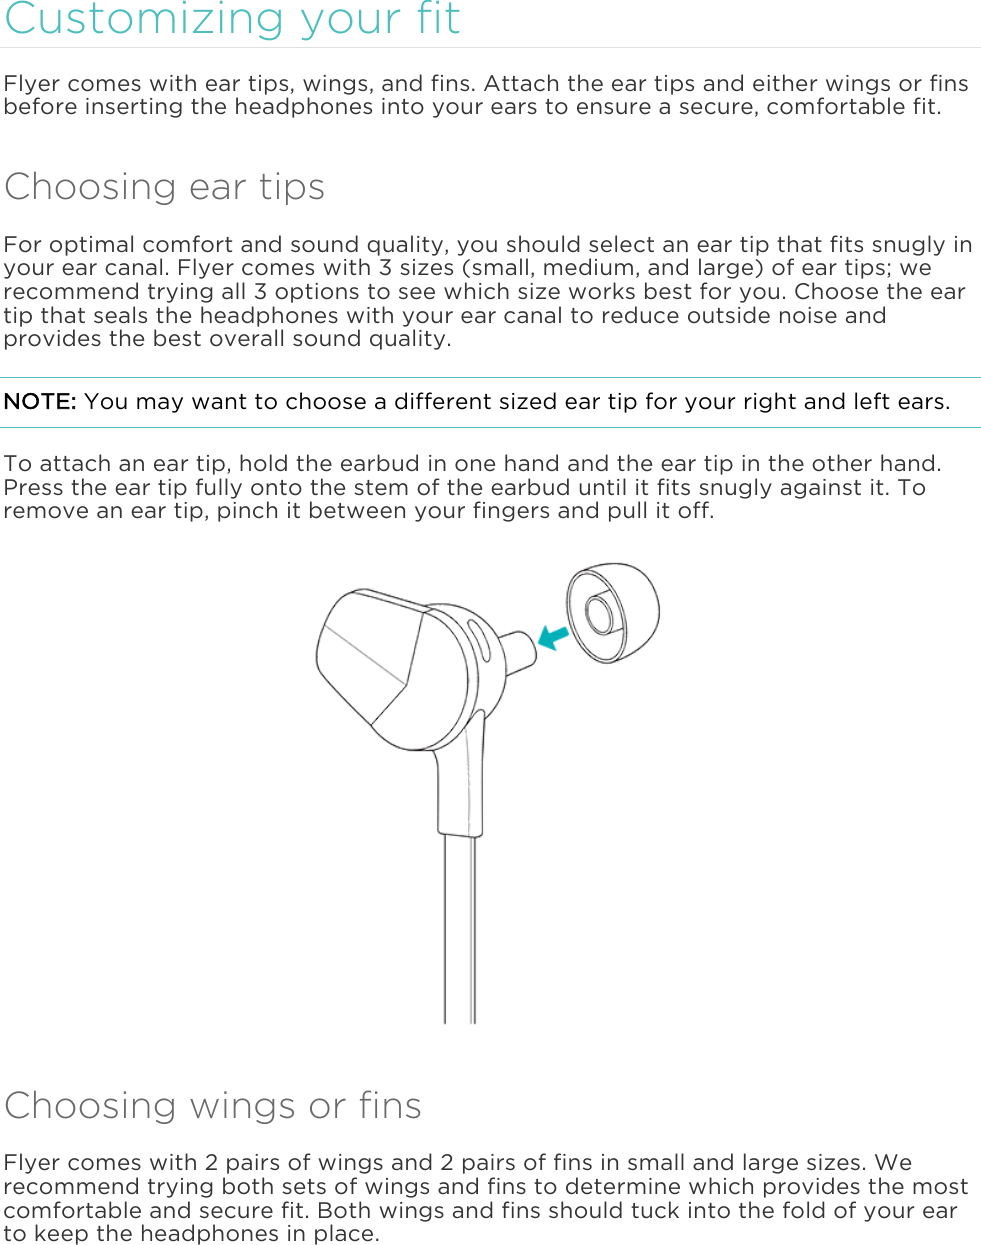  Customizing your fit Flyer comes with ear tips, wings, and fins. Attach the ear tips and either wings or fins before inserting the headphones into your ears to ensure a secure, comfortable fit. Choosing ear tips For optimal comfort and sound quality, you should select an ear tip that fits snugly in your ear canal. Flyer comes with 3 sizes (small, medium, and large) of ear tips; we recommend trying all 3 options to see which size works best for you. Choose the ear tip that seals the headphones with your ear canal to reduce outside noise and provides the best overall sound quality.  NOTE: You may want to choose a different sized ear tip for your right and left ears. To attach an ear tip, hold the earbud in one hand and the ear tip in the other hand. Press the ear tip fully onto the stem of the earbud until it fits snugly against it. To remove an ear tip, pinch it between your fingers and pull it off.  Choosing wings or fins Flyer comes with 2 pairs of wings and 2 pairs of fins in small and large sizes. We recommend trying both sets of wings and fins to determine which provides the most comfortable and secure fit. Both wings and fins should tuck into the fold of your ear to keep the headphones in place. 